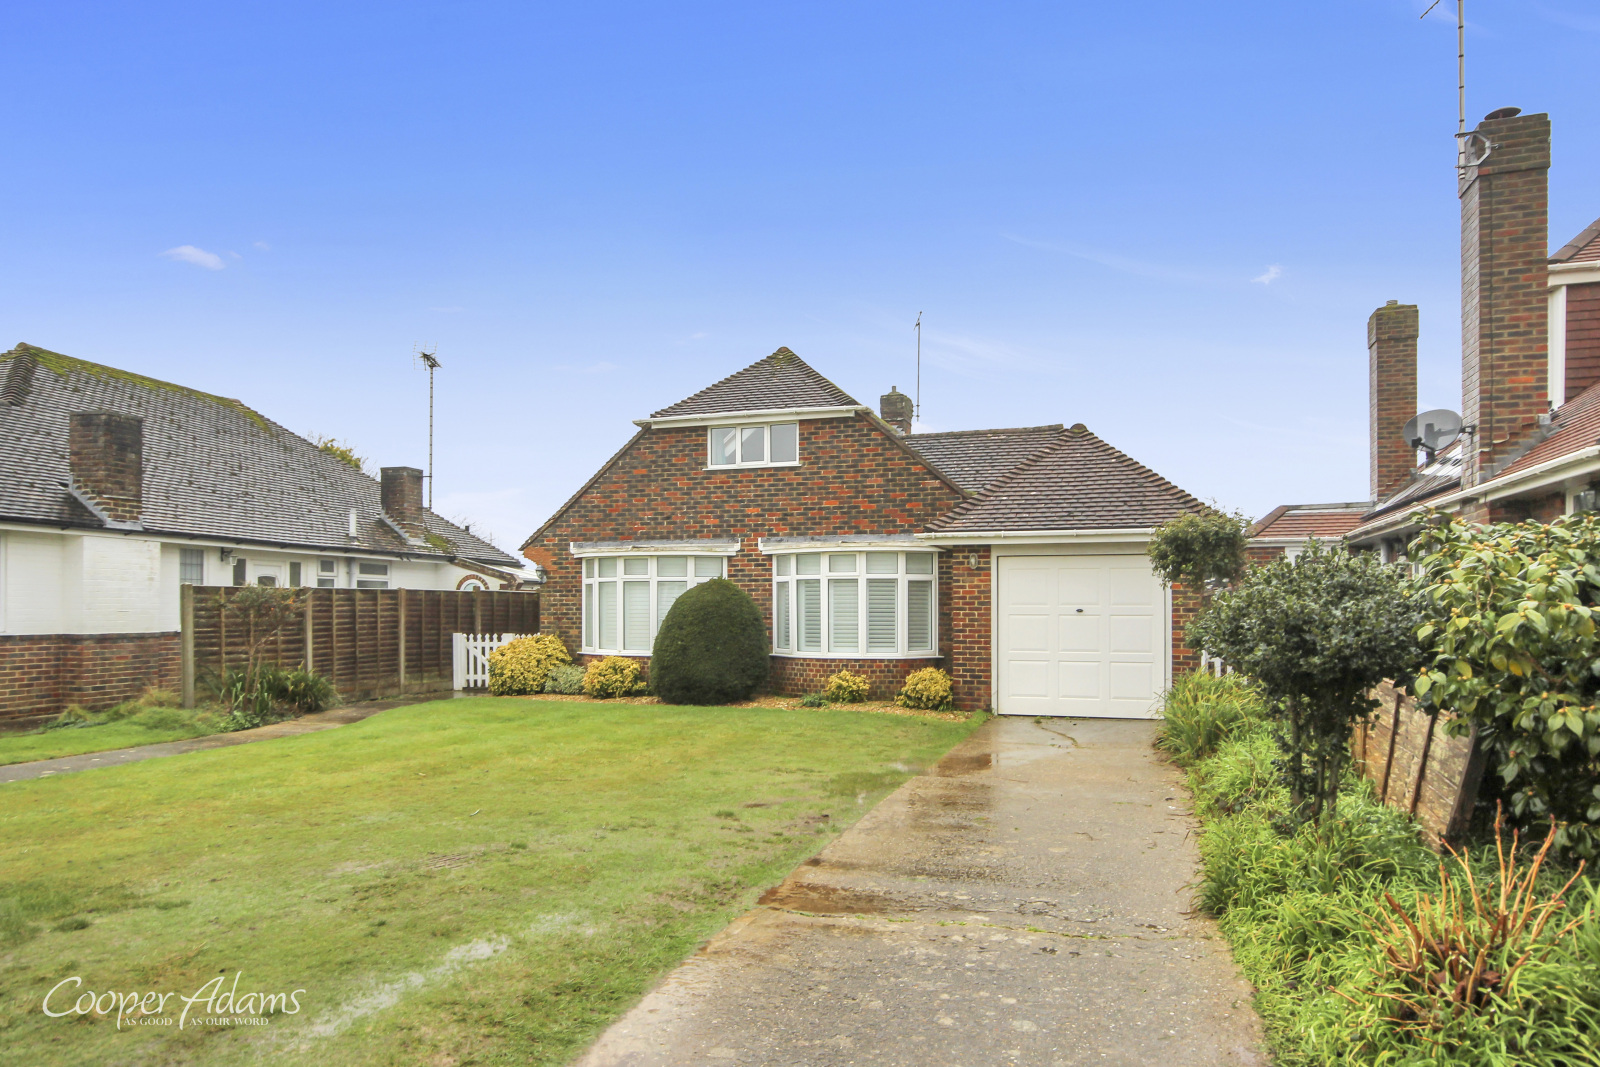 4 bed house to rent in The Roystons, East Preston  - Property Image 1